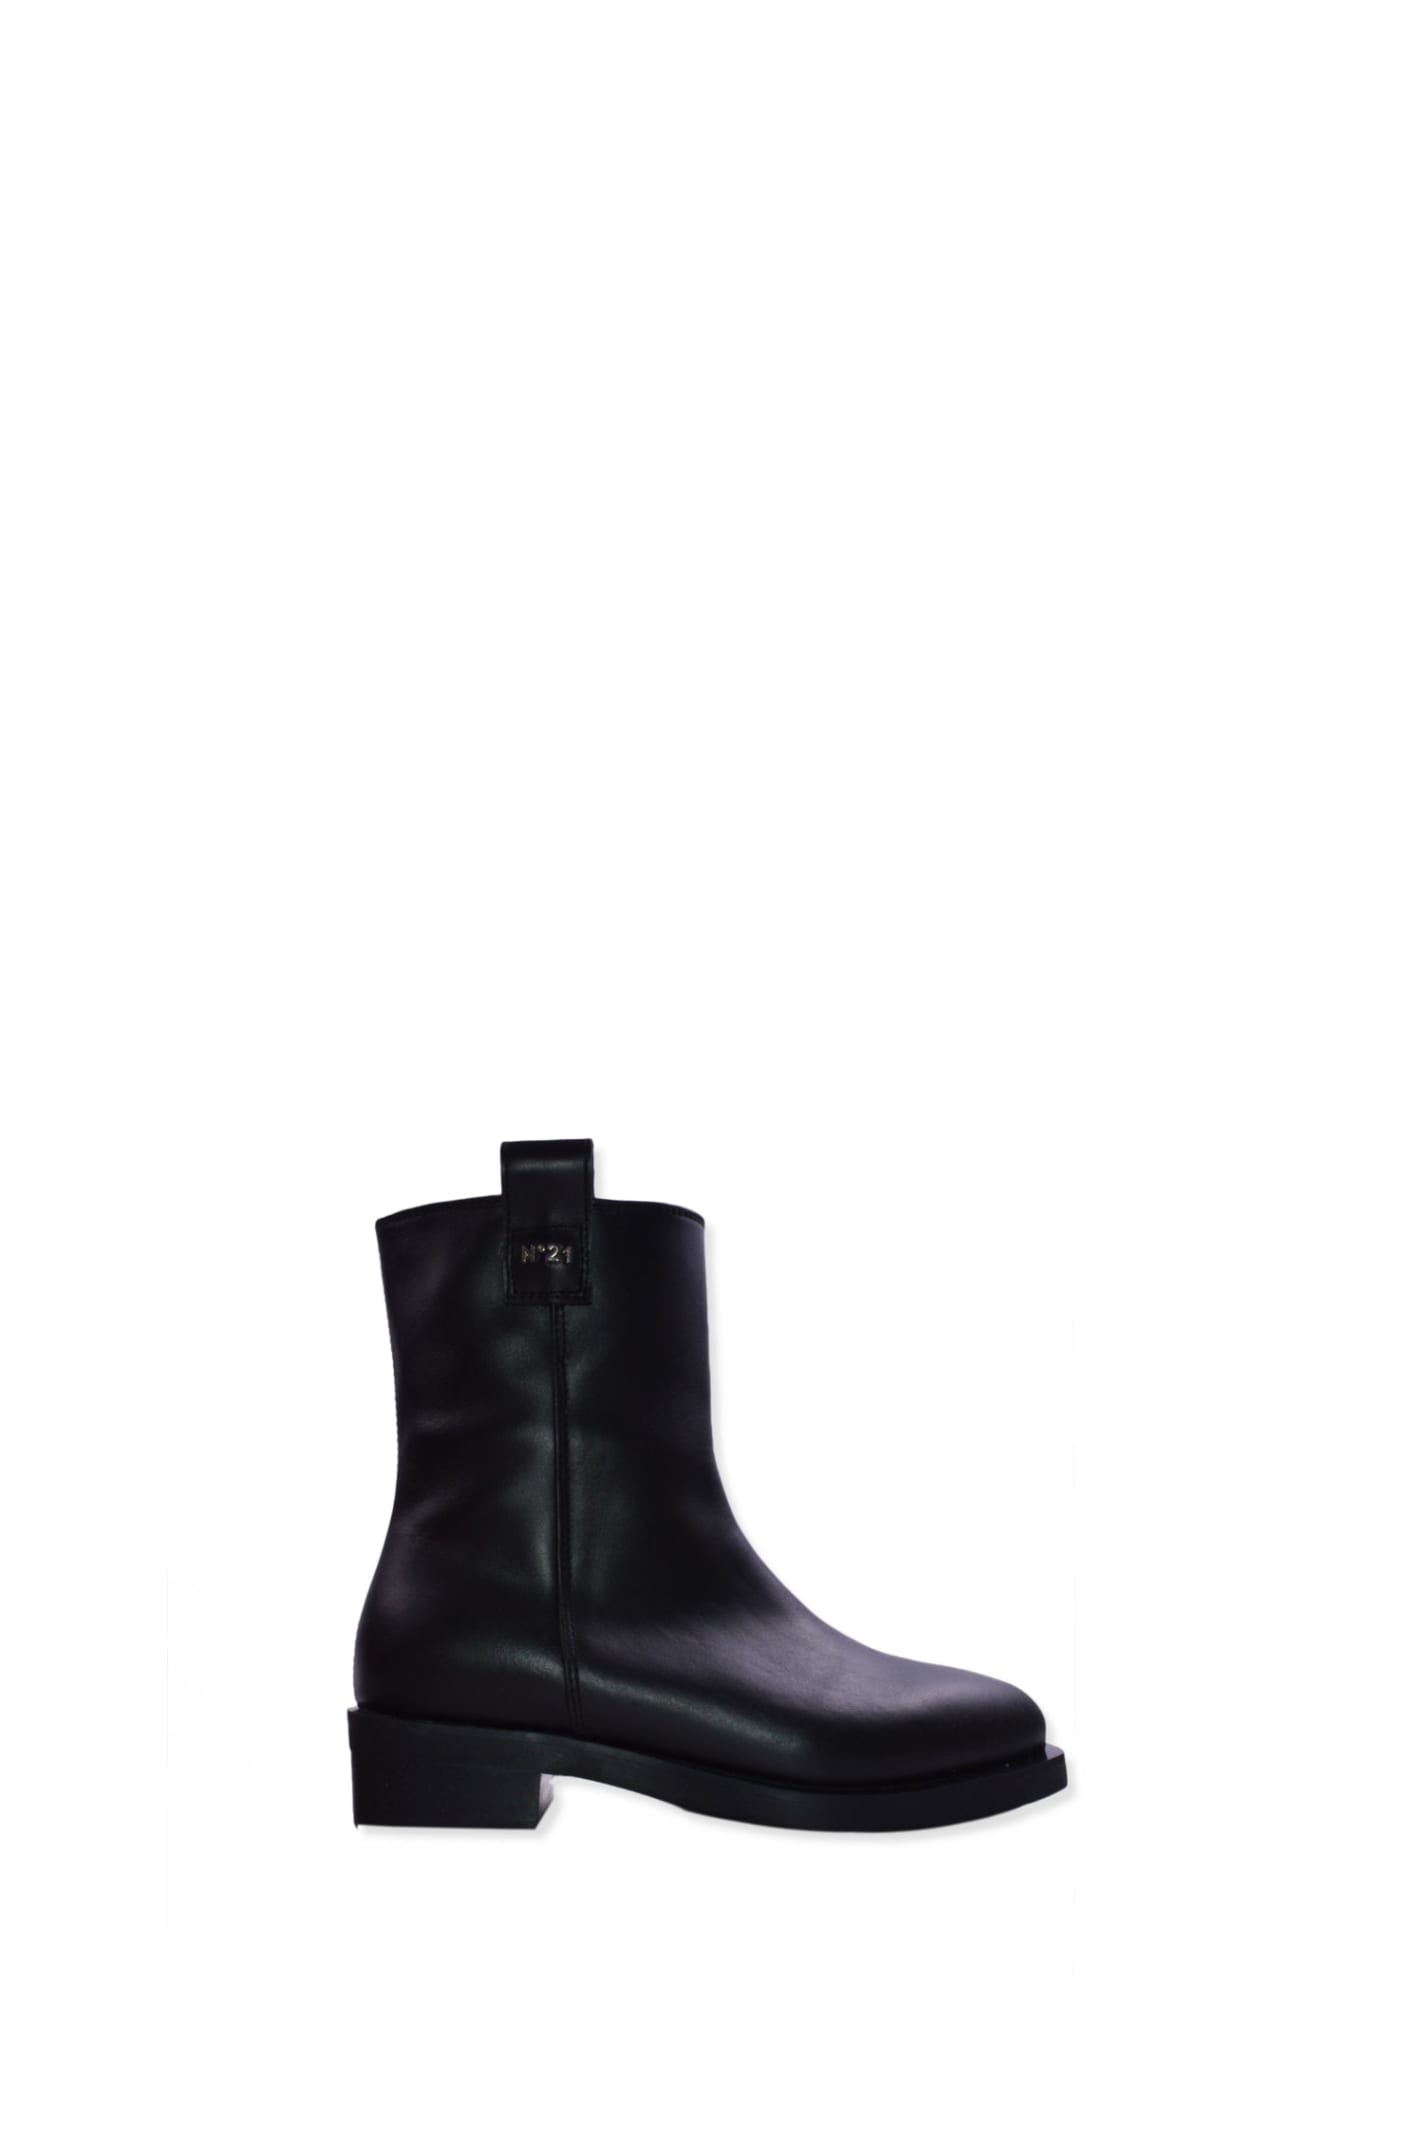 N°21 LEATHER ANKLE BOOTS